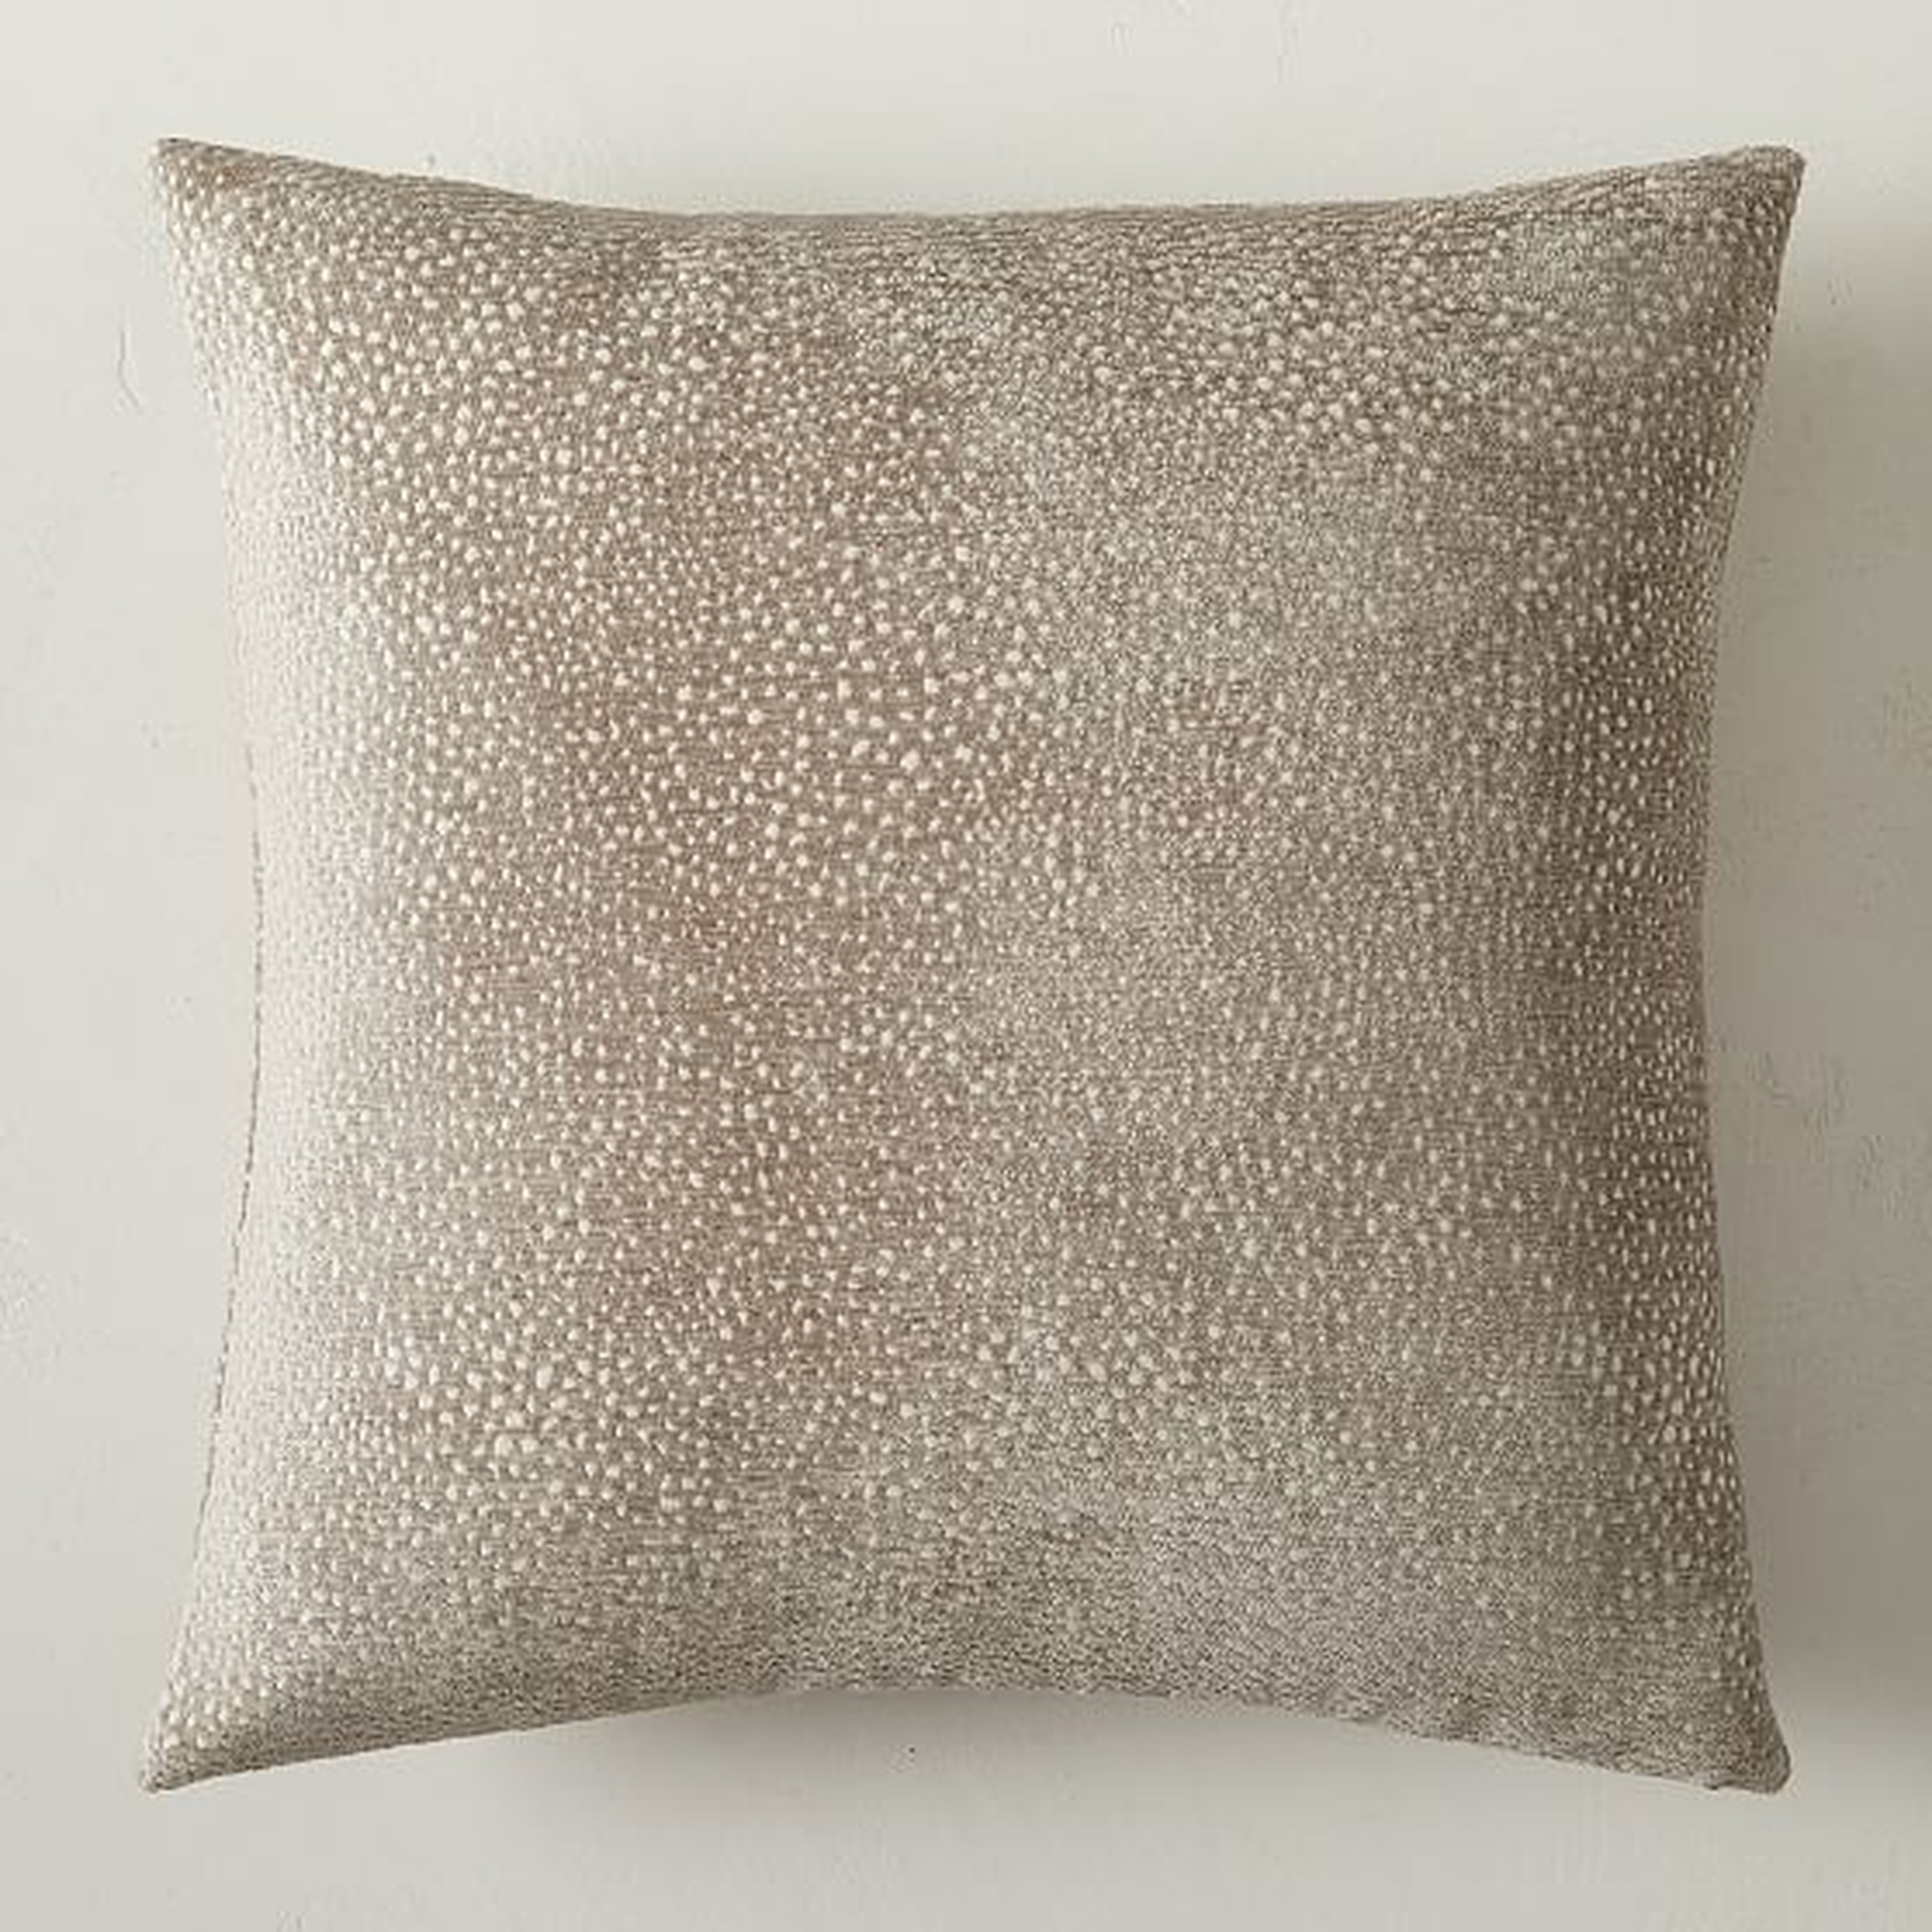 Dotted Chenille Jacquard Pillow Cover, 20"x20", Dark Tan, Set of 2 - West Elm